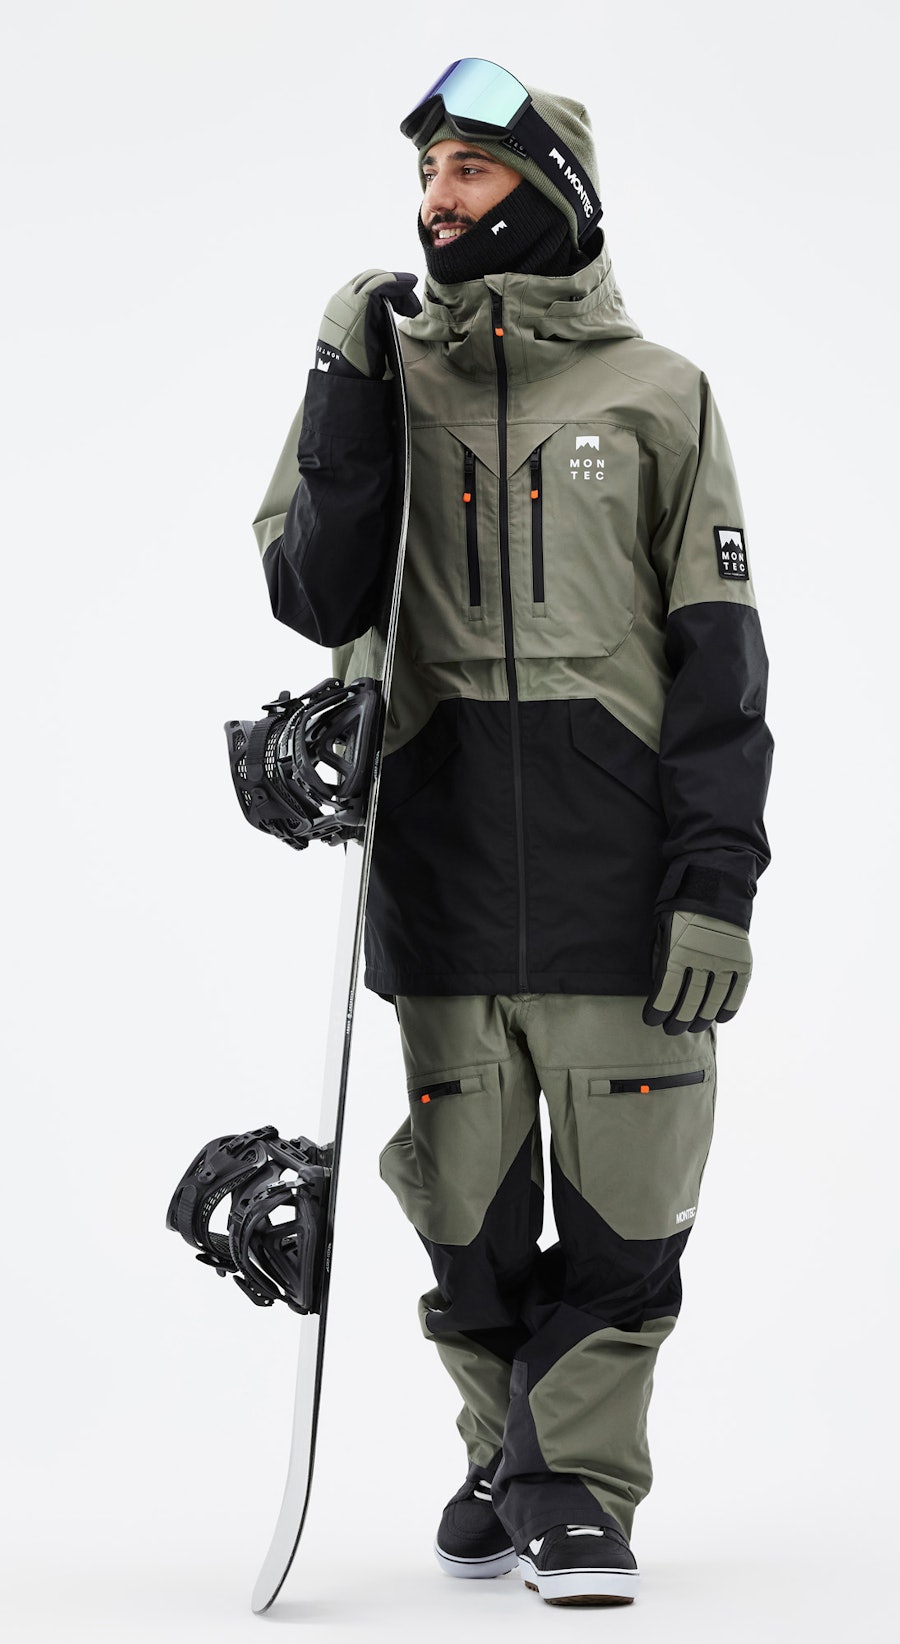 Arch Outfit Snowboard Homme Greenish/Black